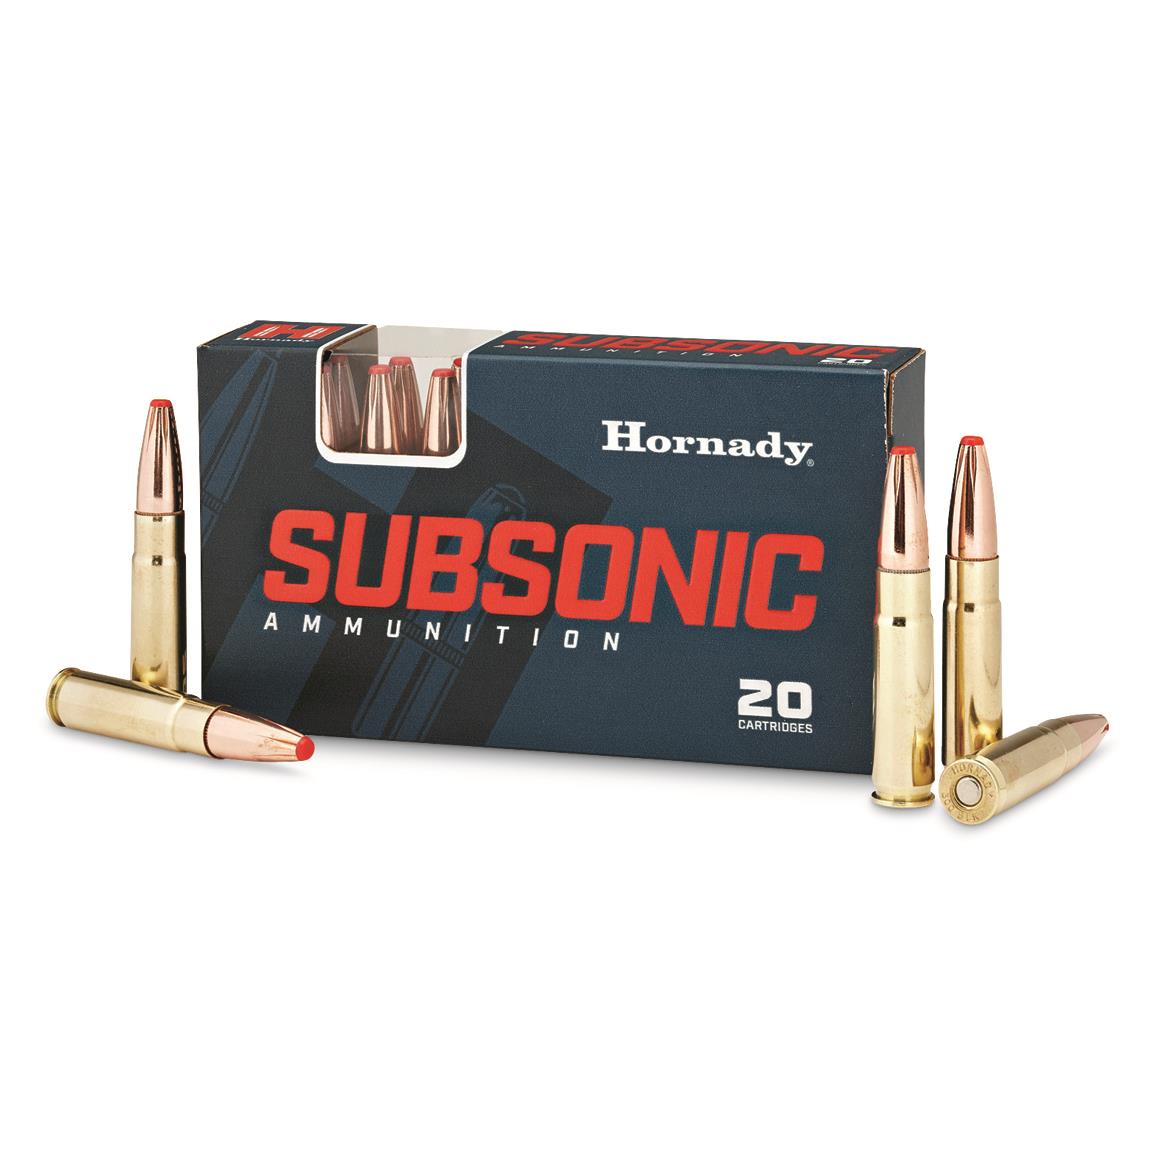 Hornady Subsonic, .300 Blackout, Sub-X, 190 Grain, 20 Rounds